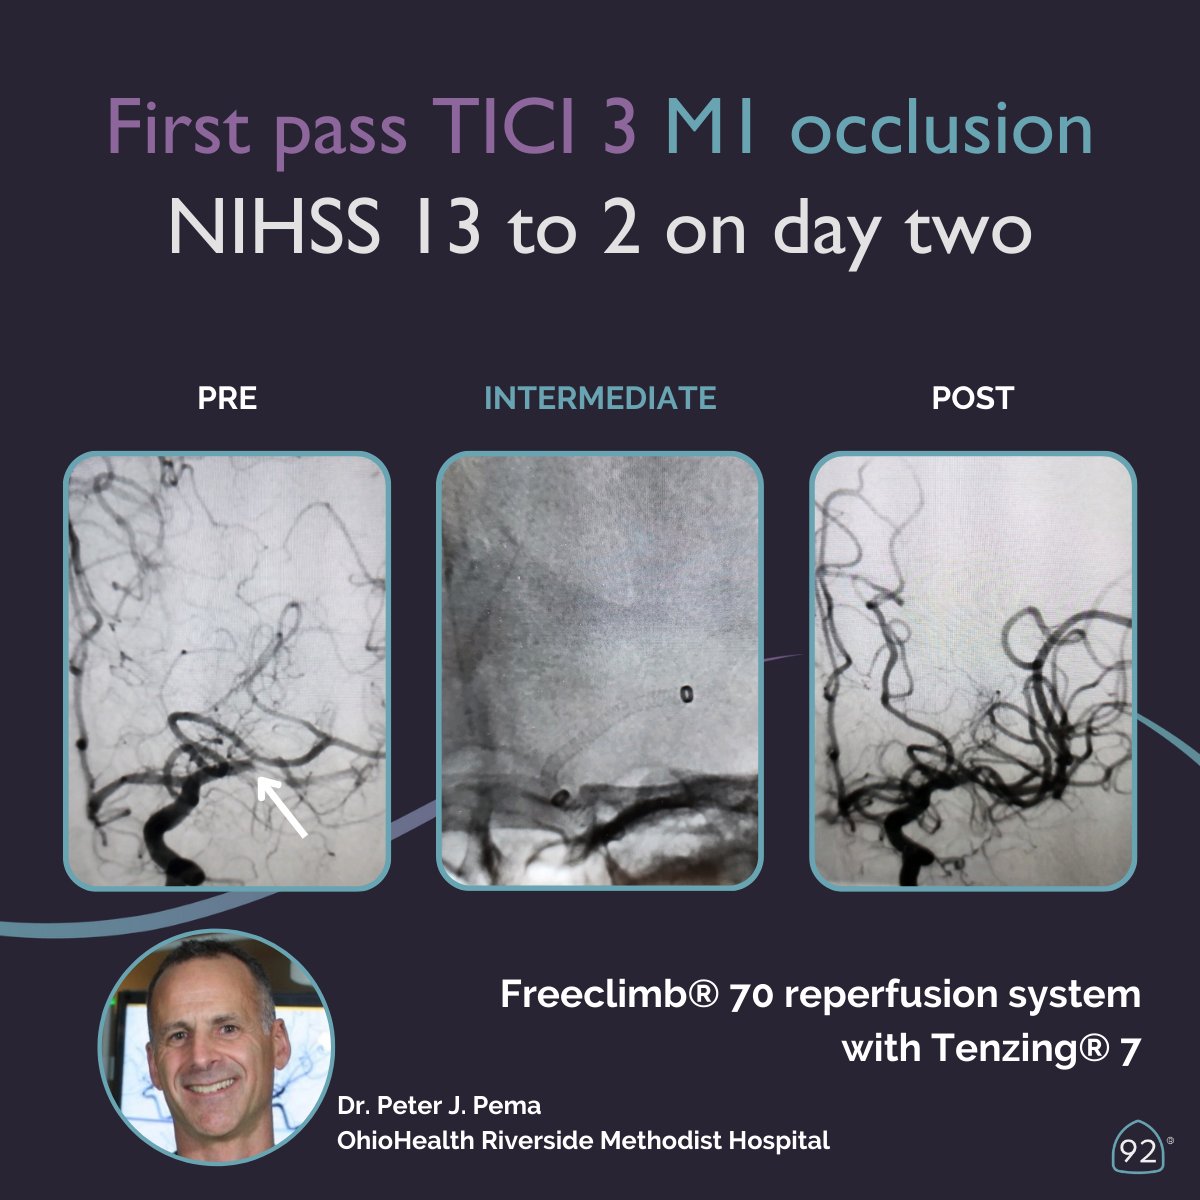 Thank you & congratulations to Dr. Peter J. Pema and the team at OhioHealth Riverside Methodist Hospital for sharing this successful M1 case using the #FreeClimb70 reperfusion system. No MC or guidewire was necessary when using #Tenzing7 on this first pass TICI 3 case.